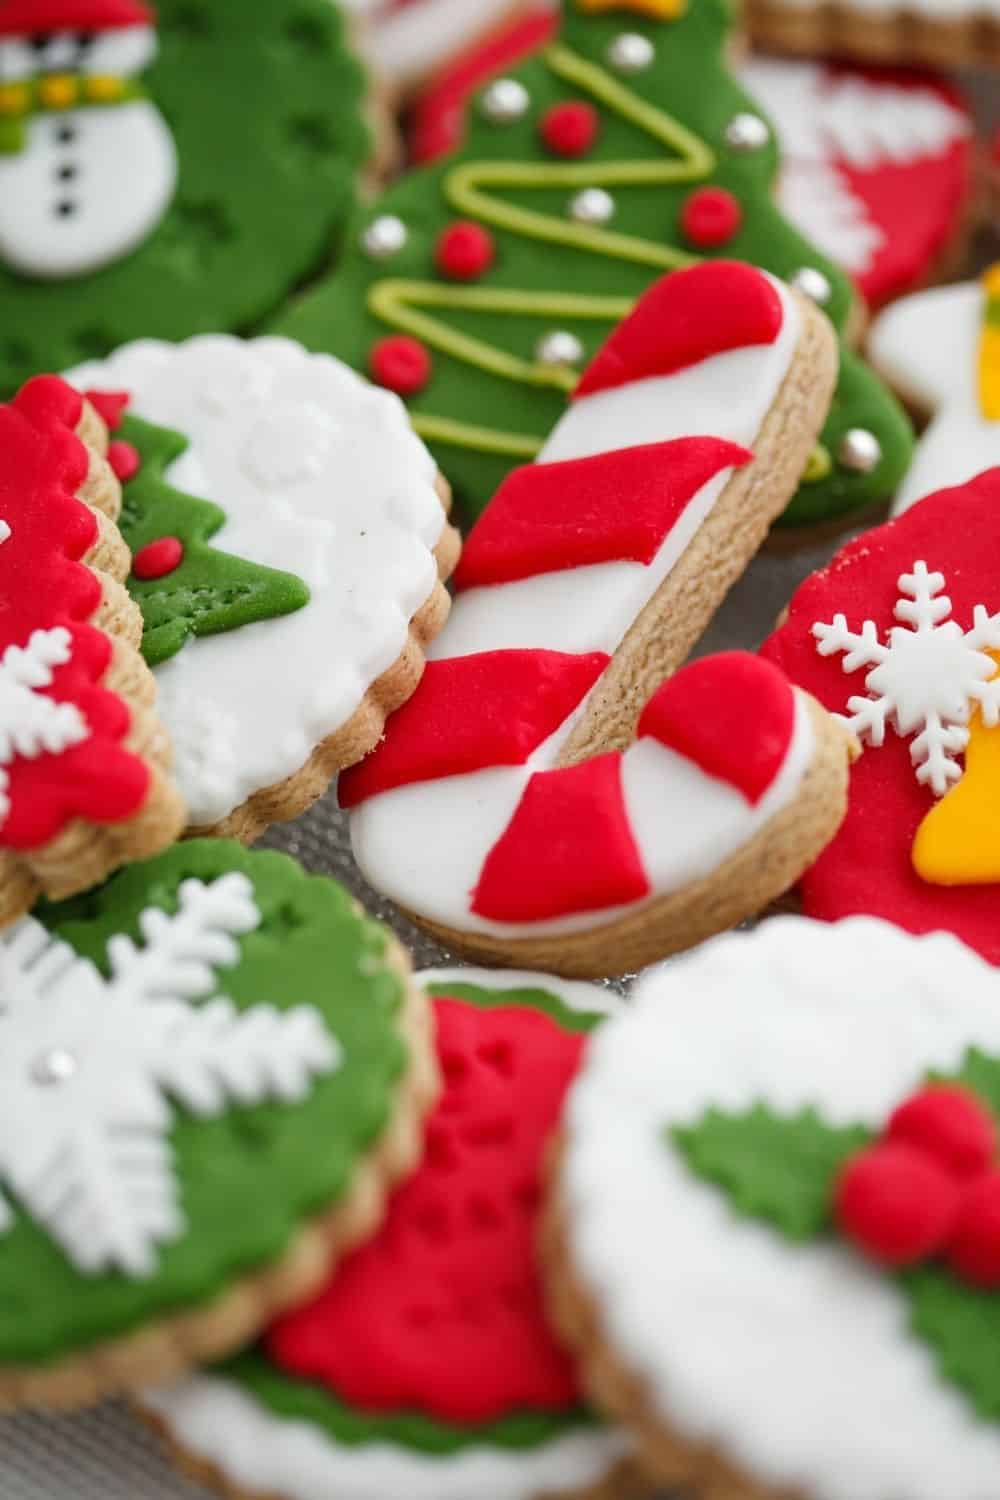 27 Festive and Delicious Christmas Party Food Your Guests Will Love